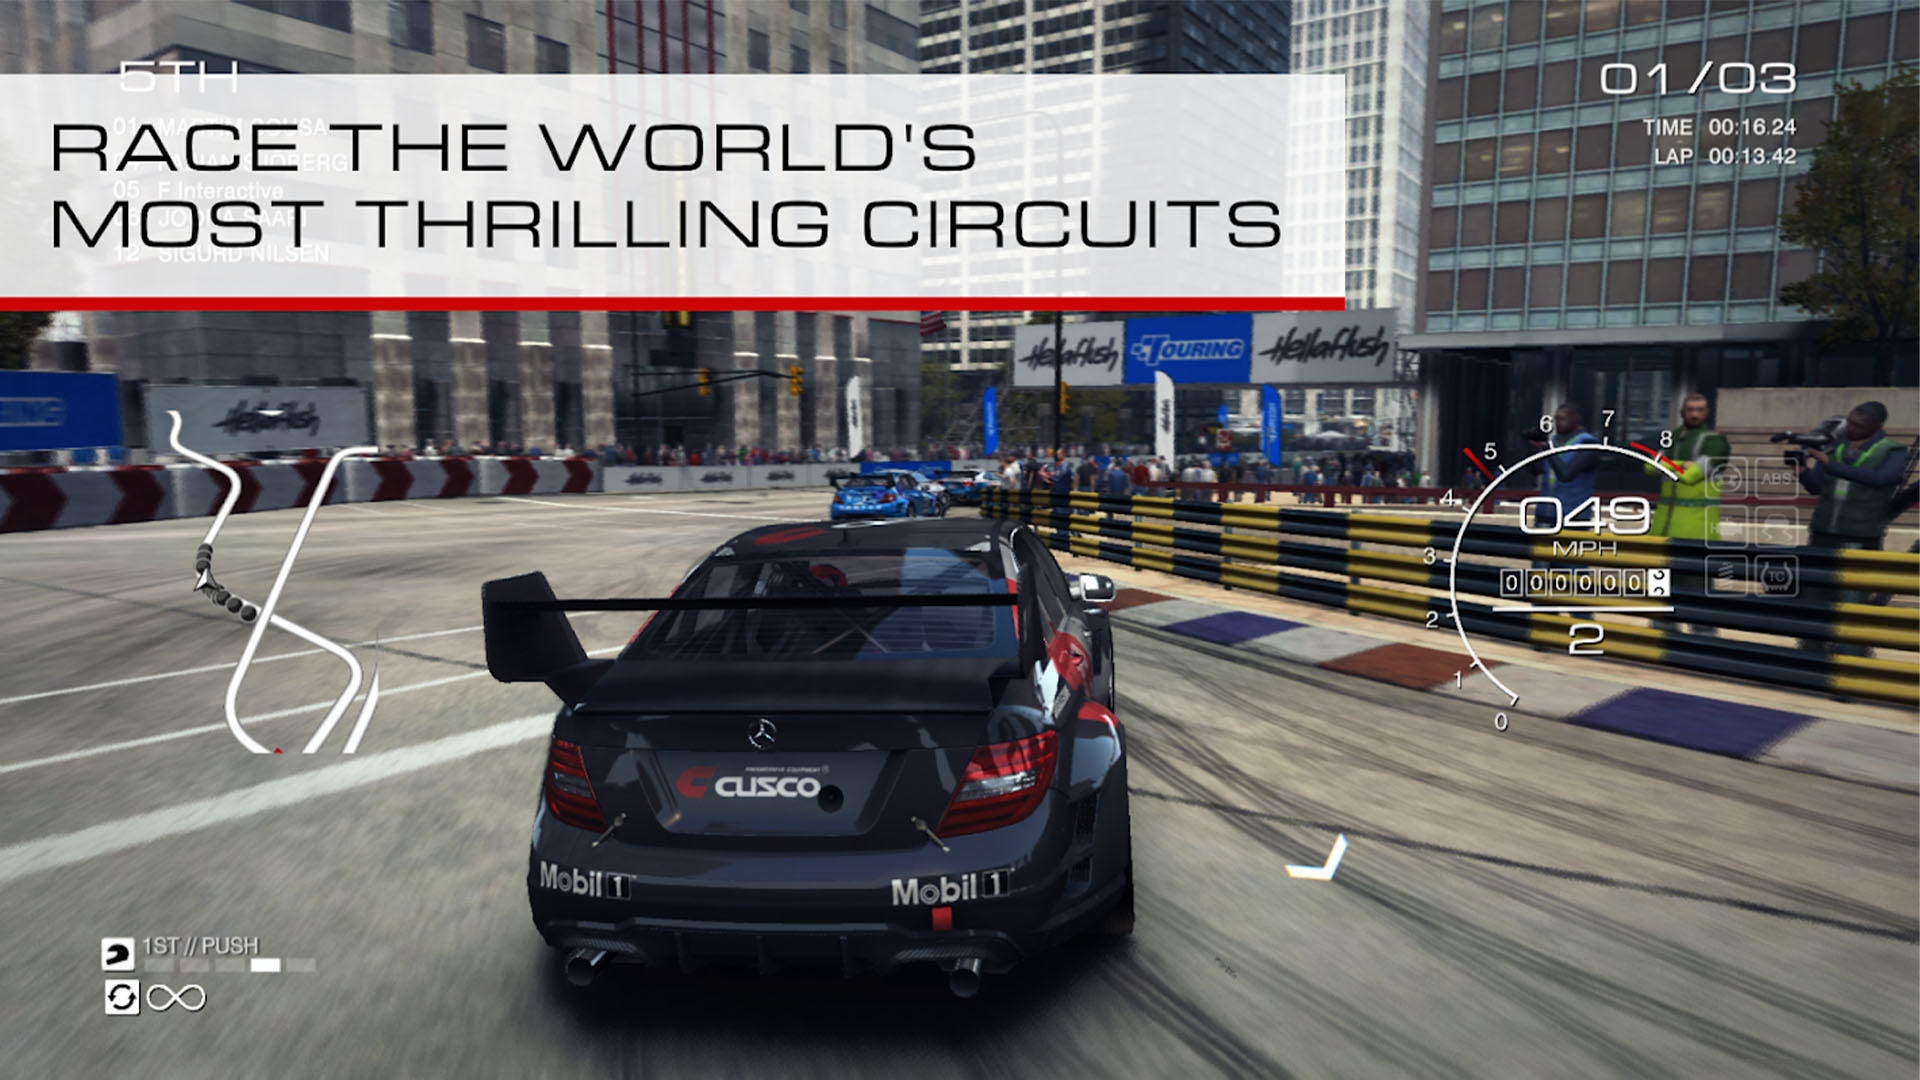 These Are the Most Popular Video Games for Racing